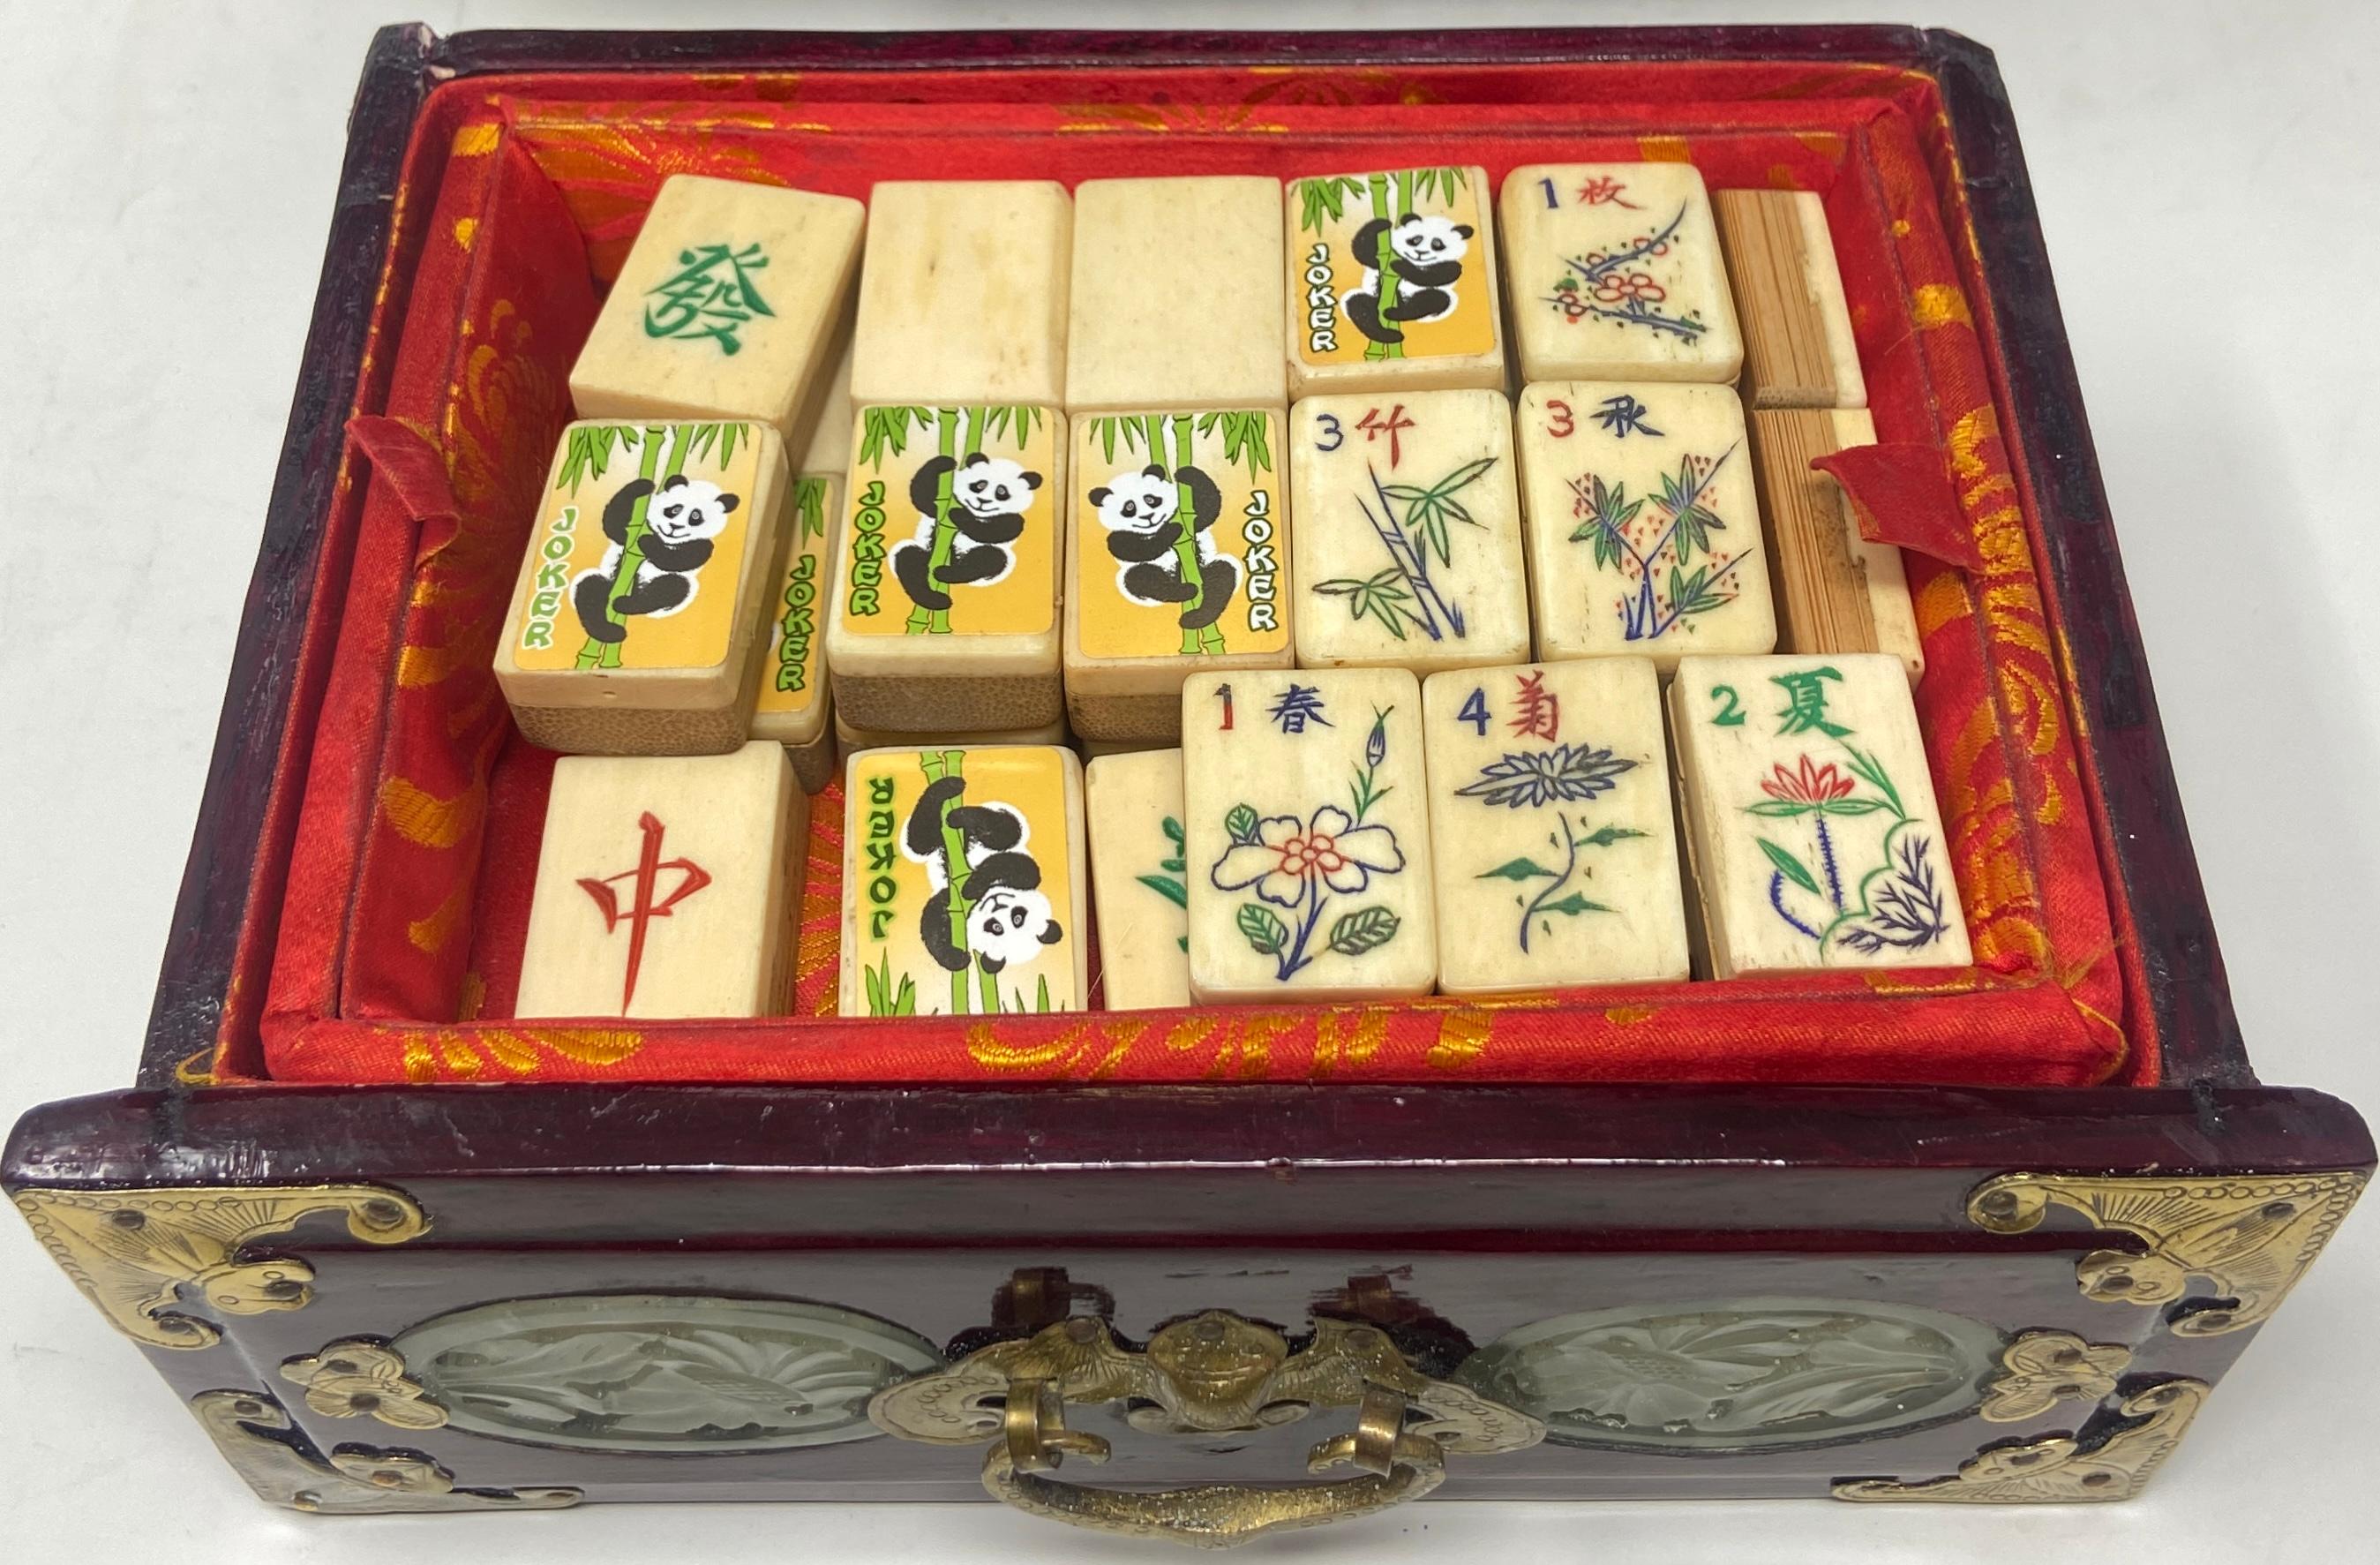 Bamboo Antique Chinese Brass-Mounted Red Lacquer Mahjong Set with Jade Inlay